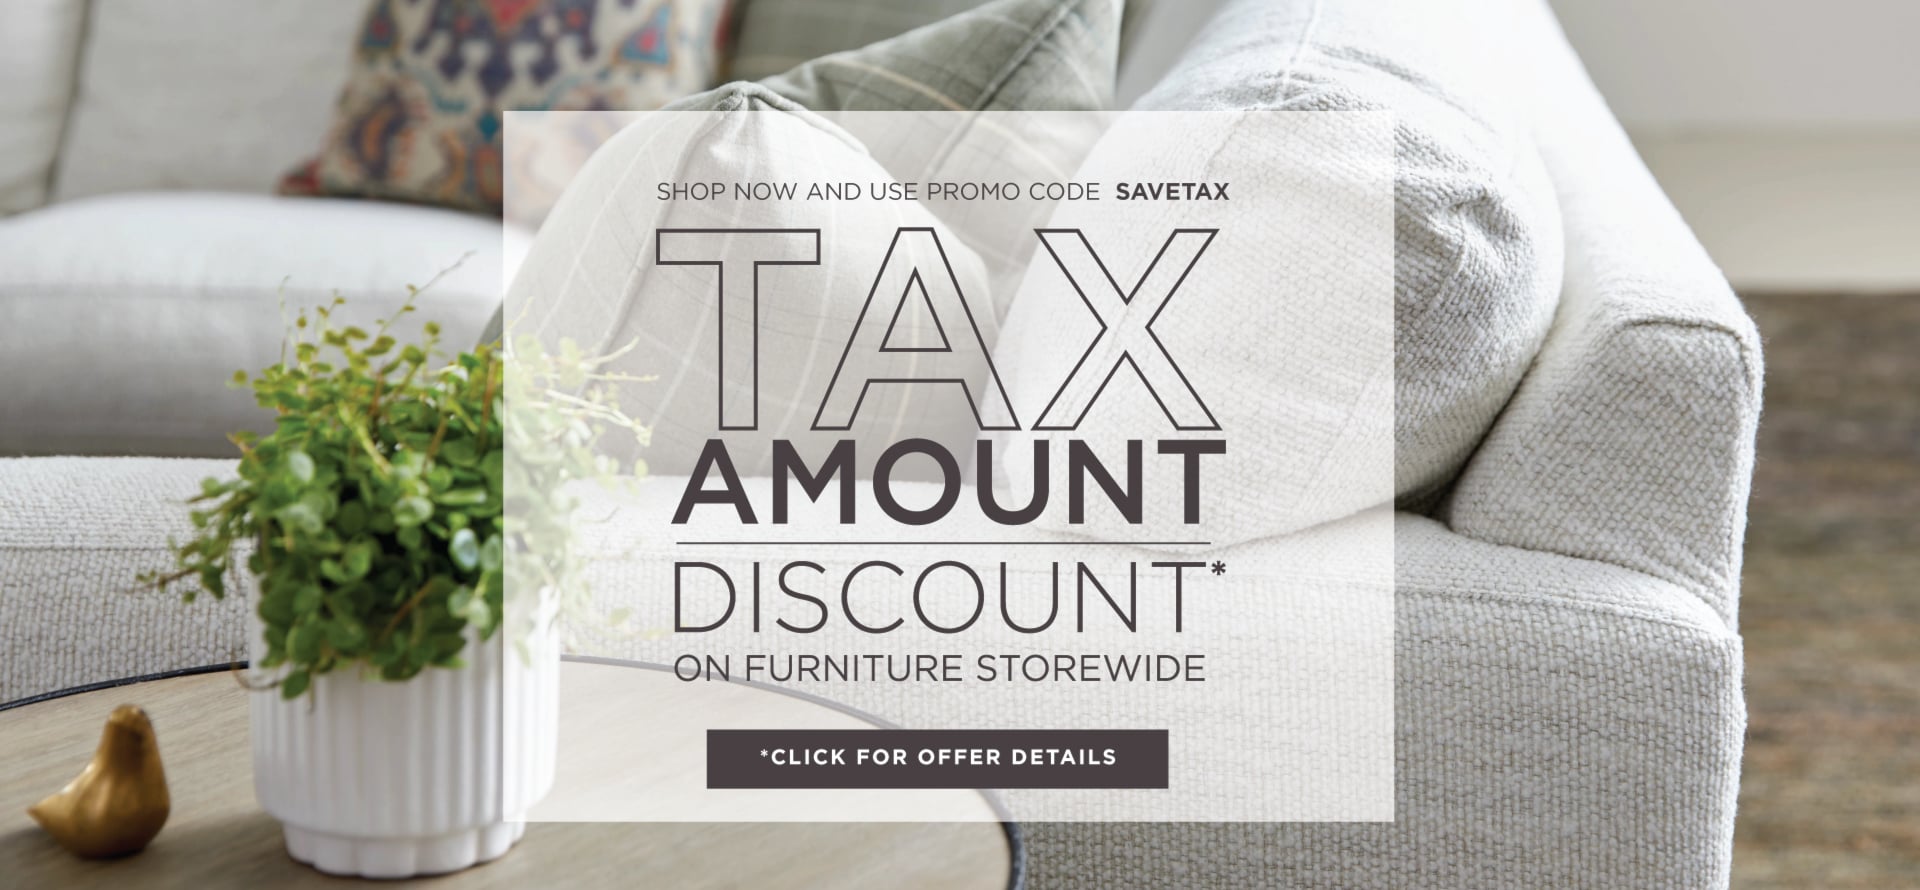 Tax Amount Discount* On Furniture Storewide | Shop Now and use promo code SAVETAX